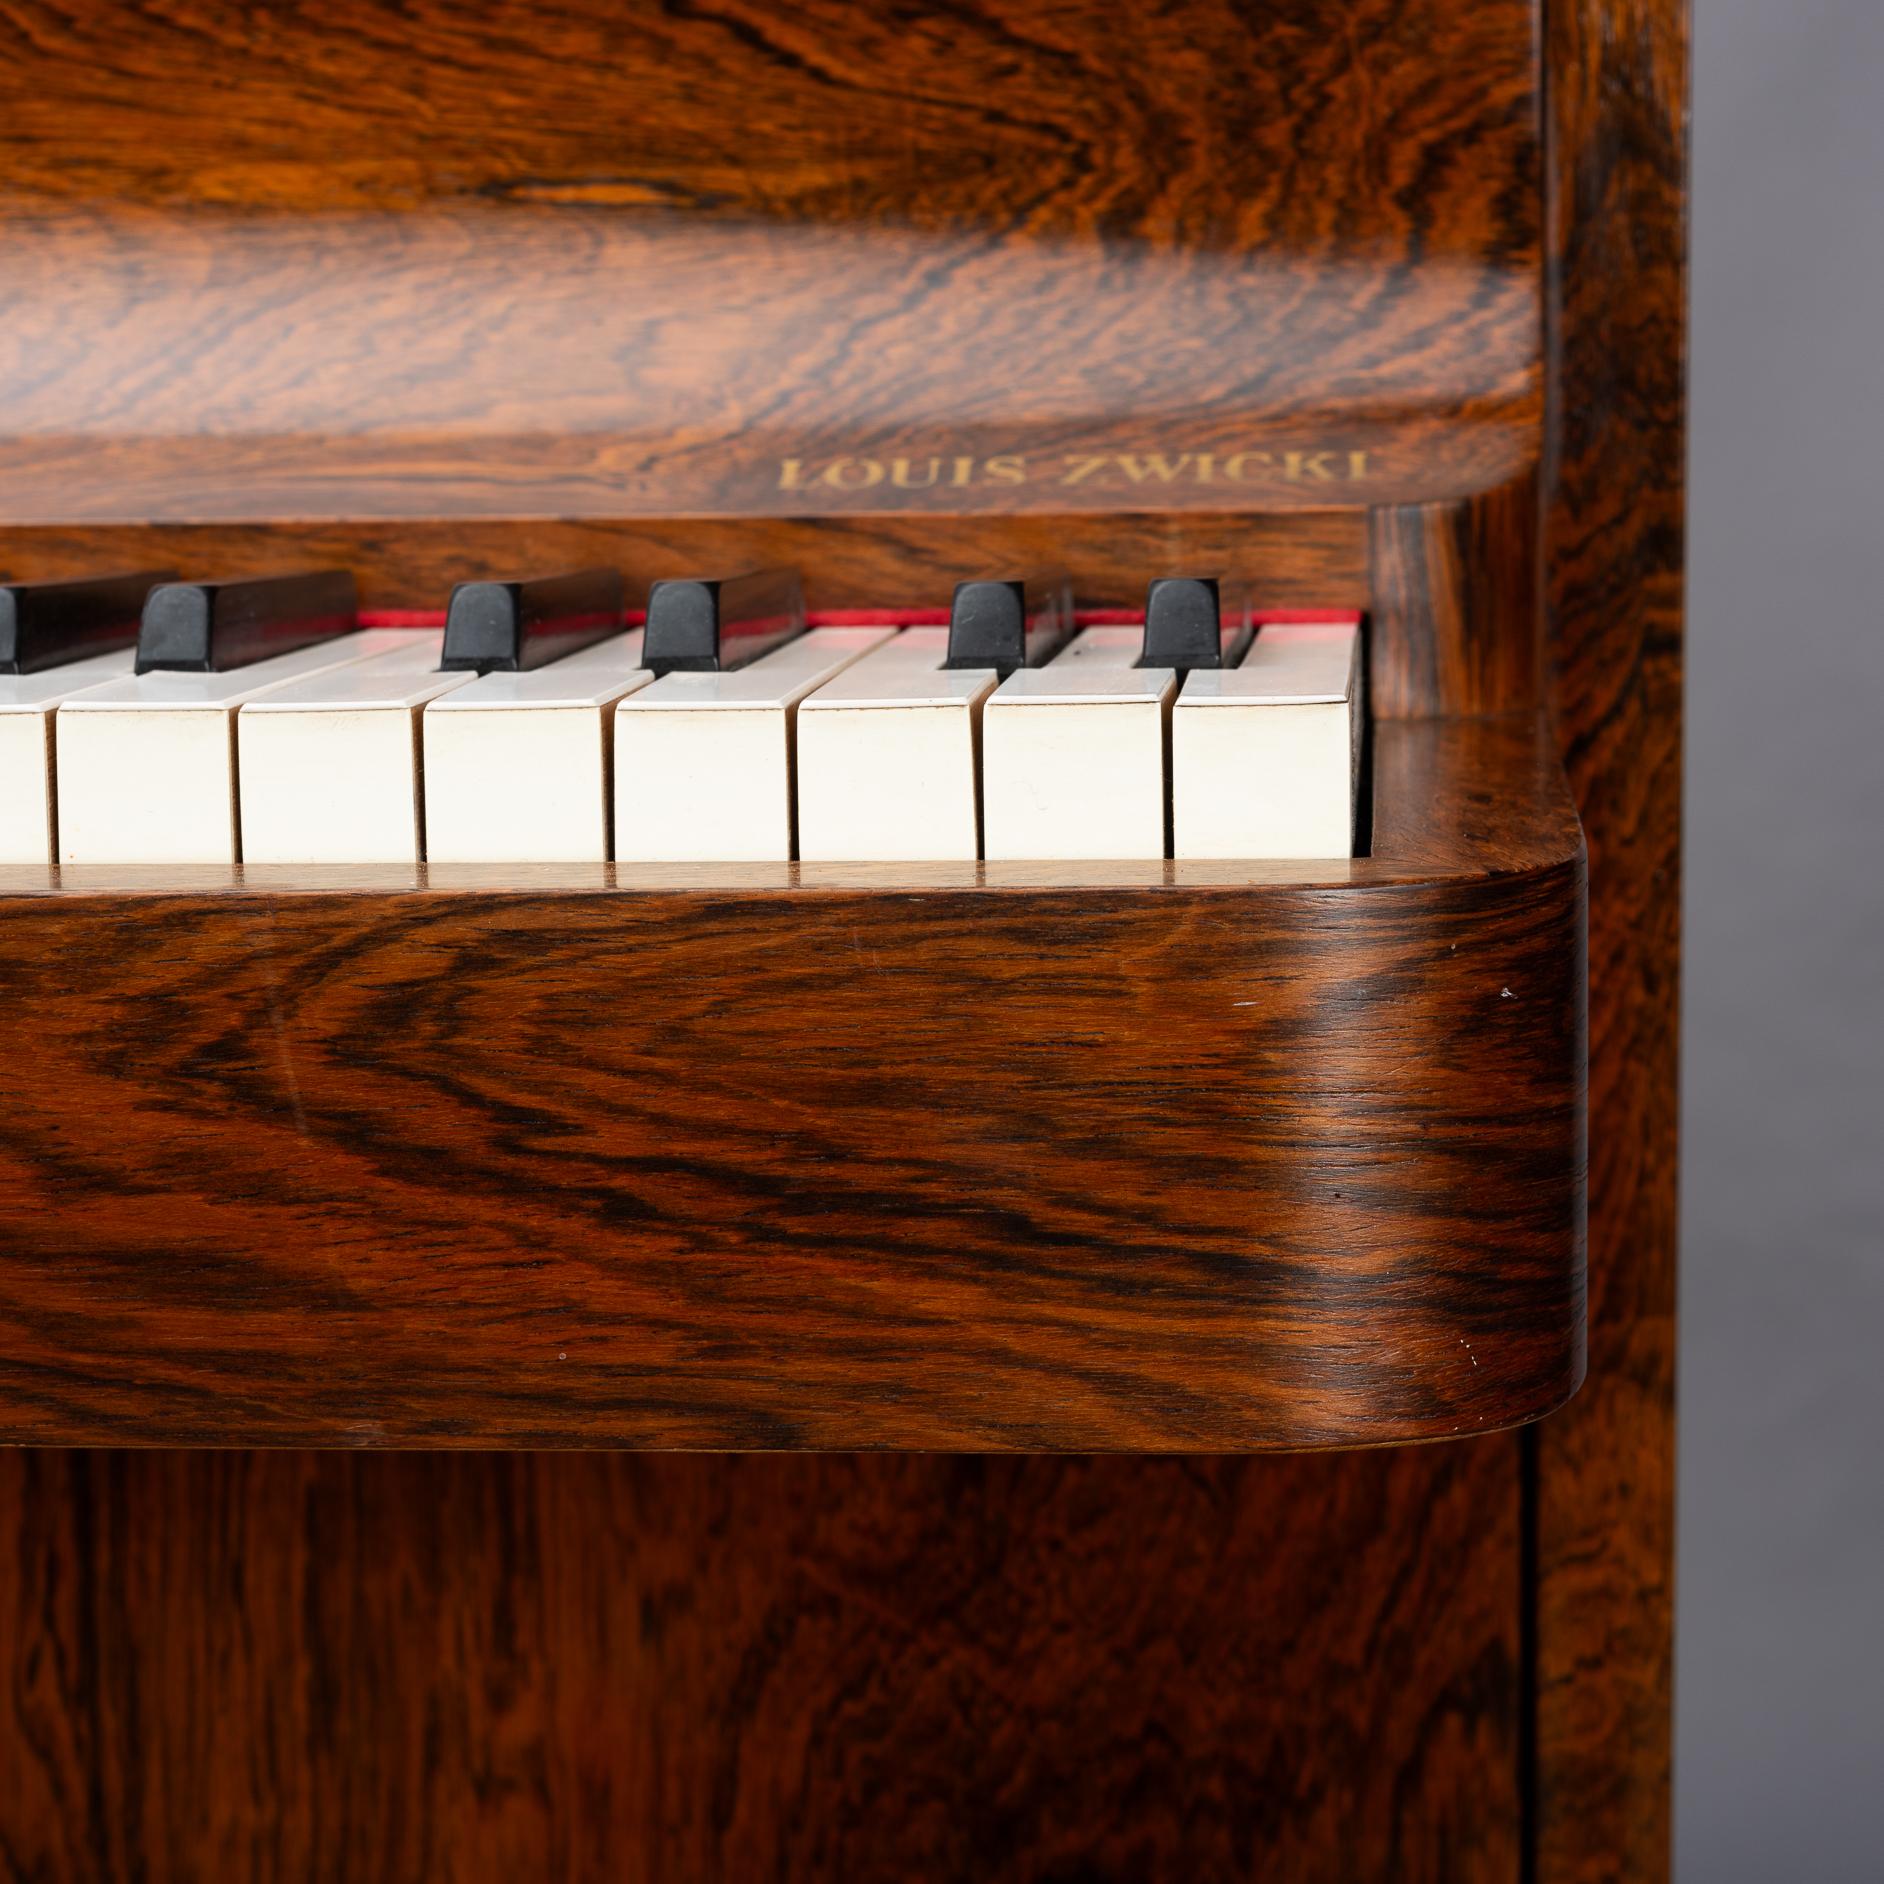 Danish Design Midcentury Rosewood Pianette by Louis Zwicki, 1950s For Sale 7